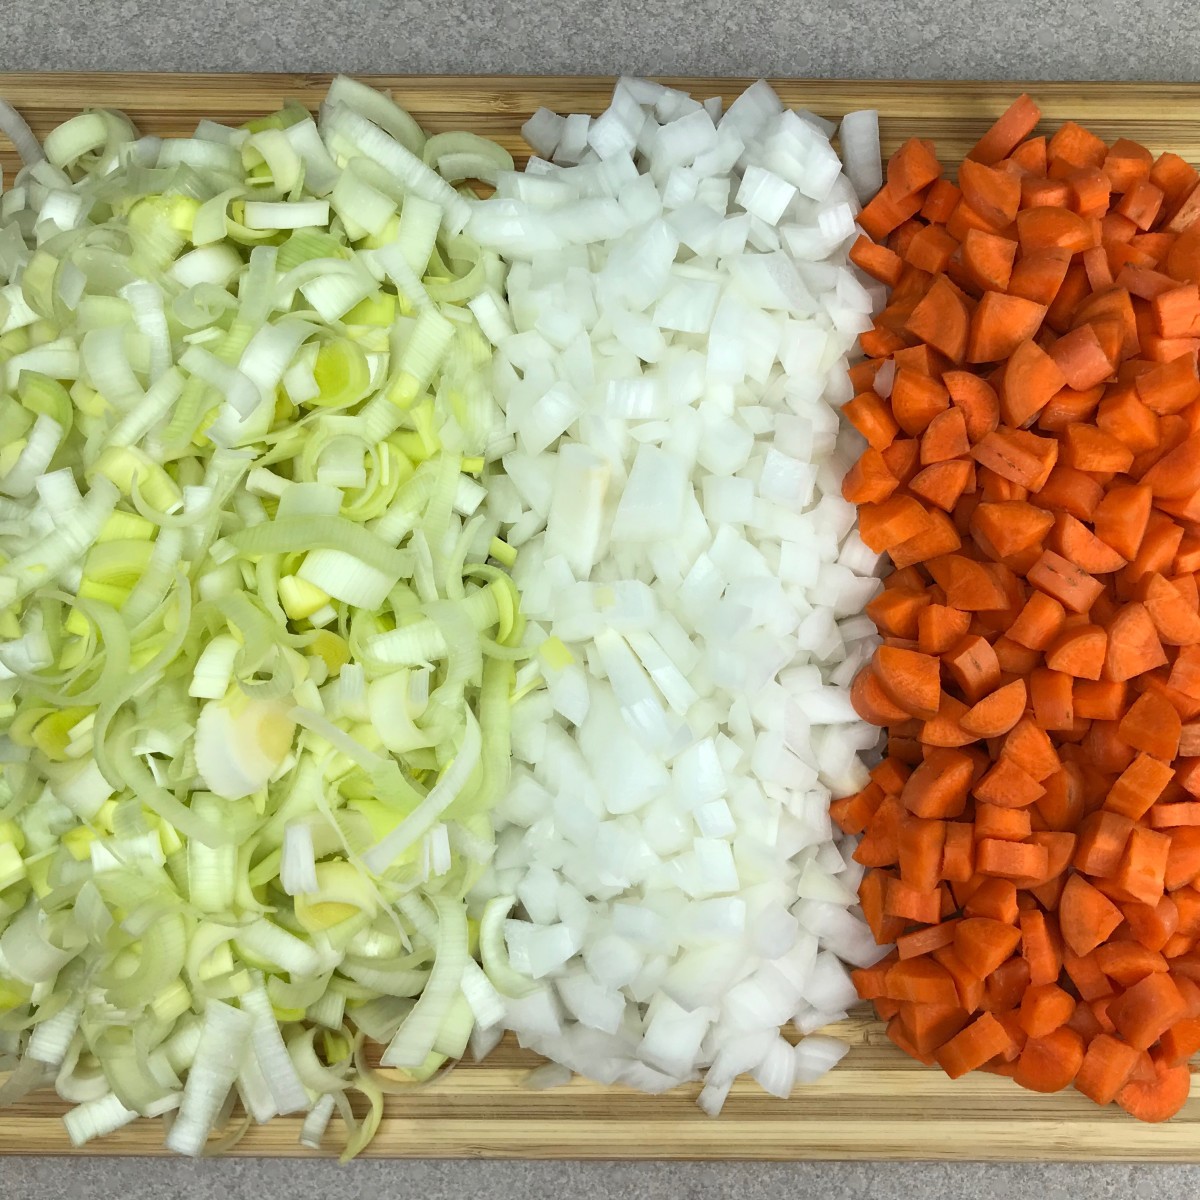 Celery, onions, and carrots are the stars of the show! If you like fewer vegetables in your soup that is totally fine. You do not have to use all of these. Adjust them as you see fit.